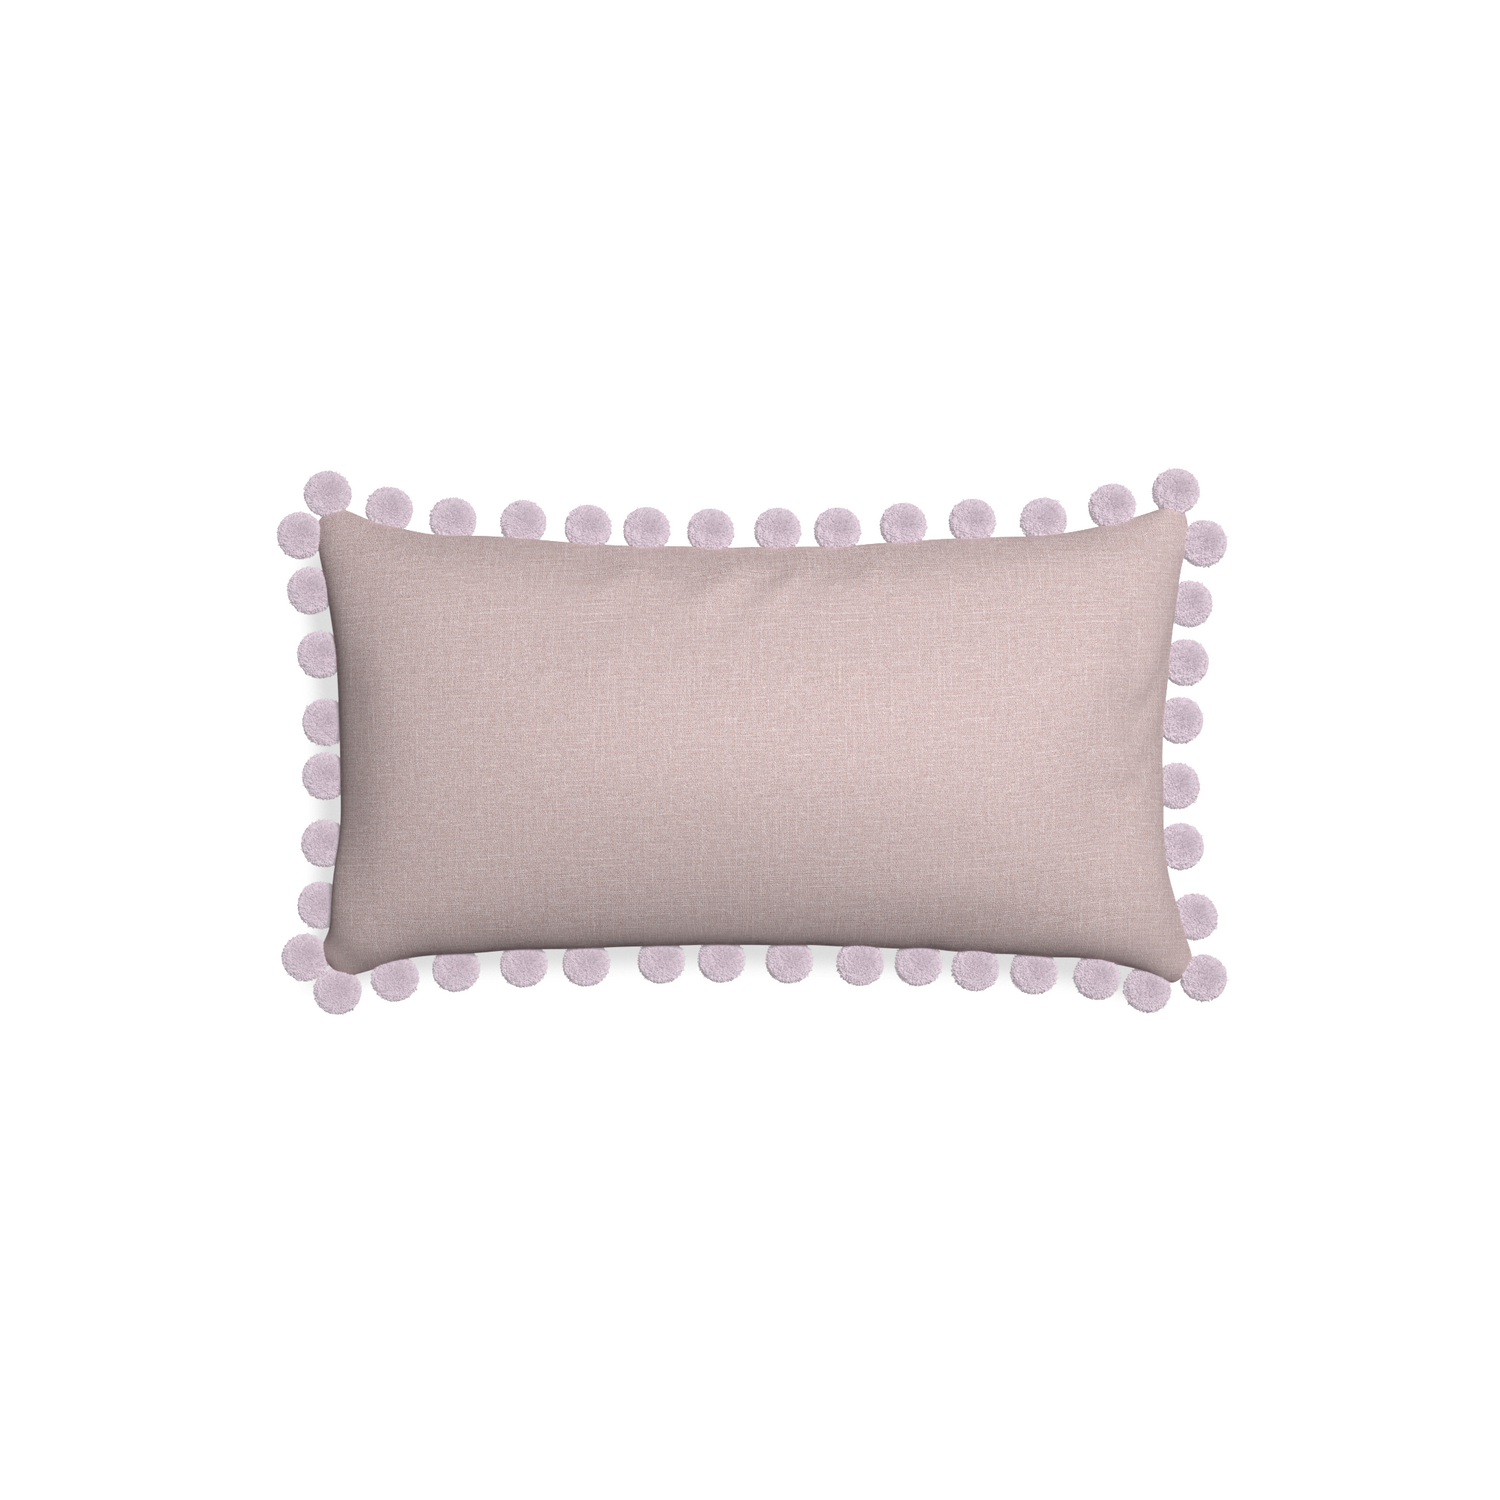 Petite-lumbar orchid custom mauve pinkpillow with l on white background